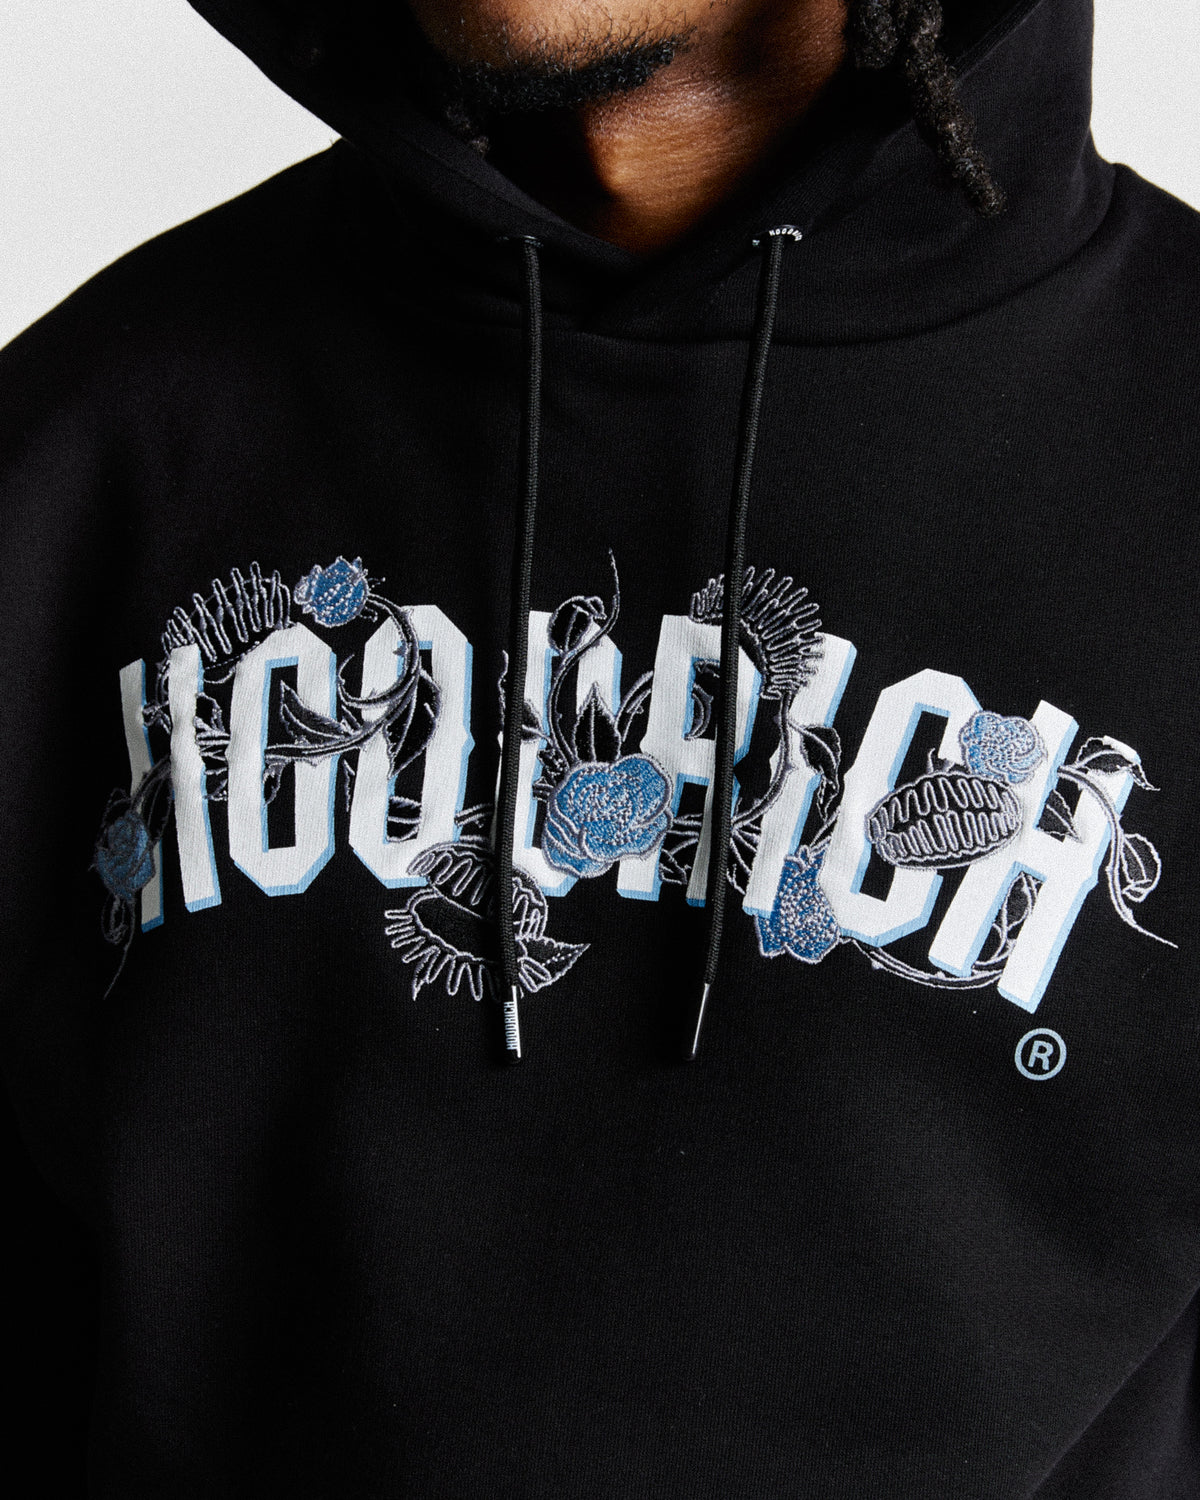 Hoodrich Mens Winter Sports Rhoback Hoodie With Letter Towel Embroidery  Colorful Blue Solid Sweatshirt C11 5 9SBX From Monclair_store1, $14.21